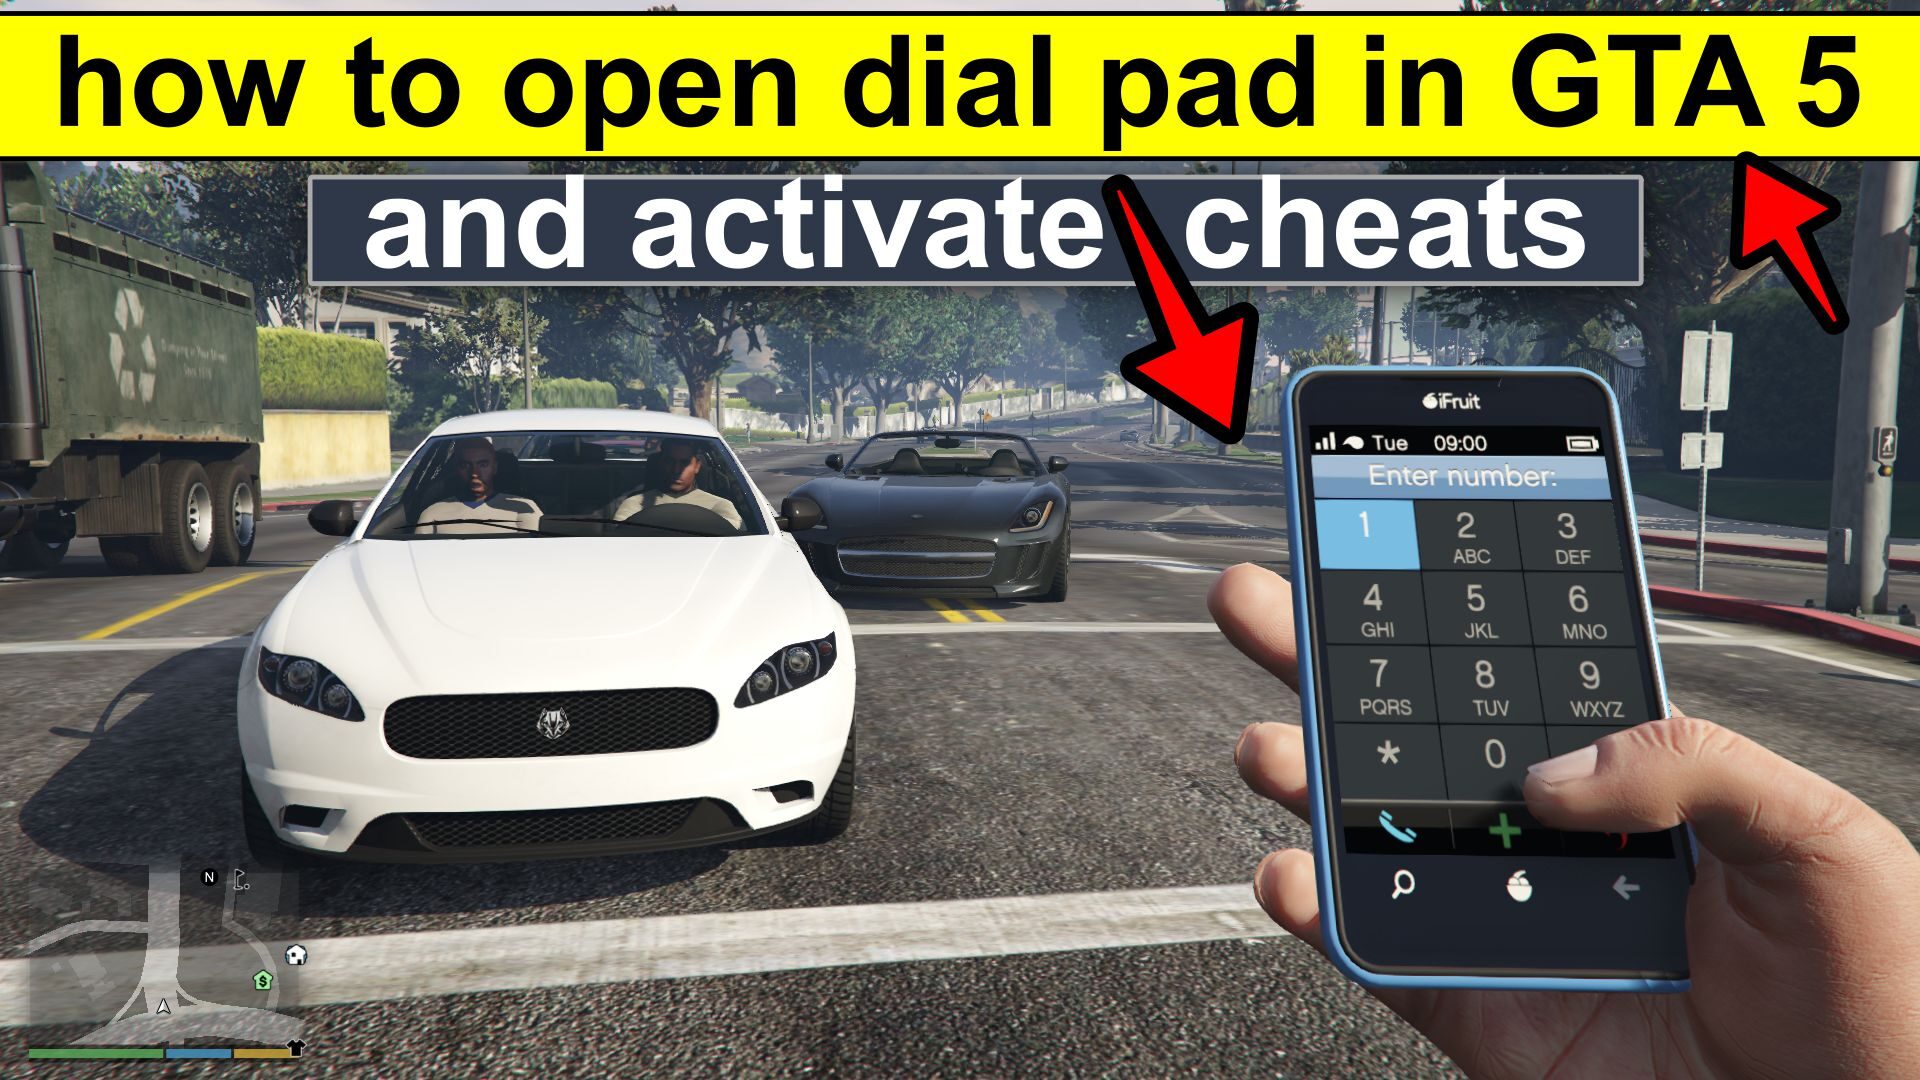 how to open dial pad in GTA 5 PC, Xbox, Playstation and activate cheats